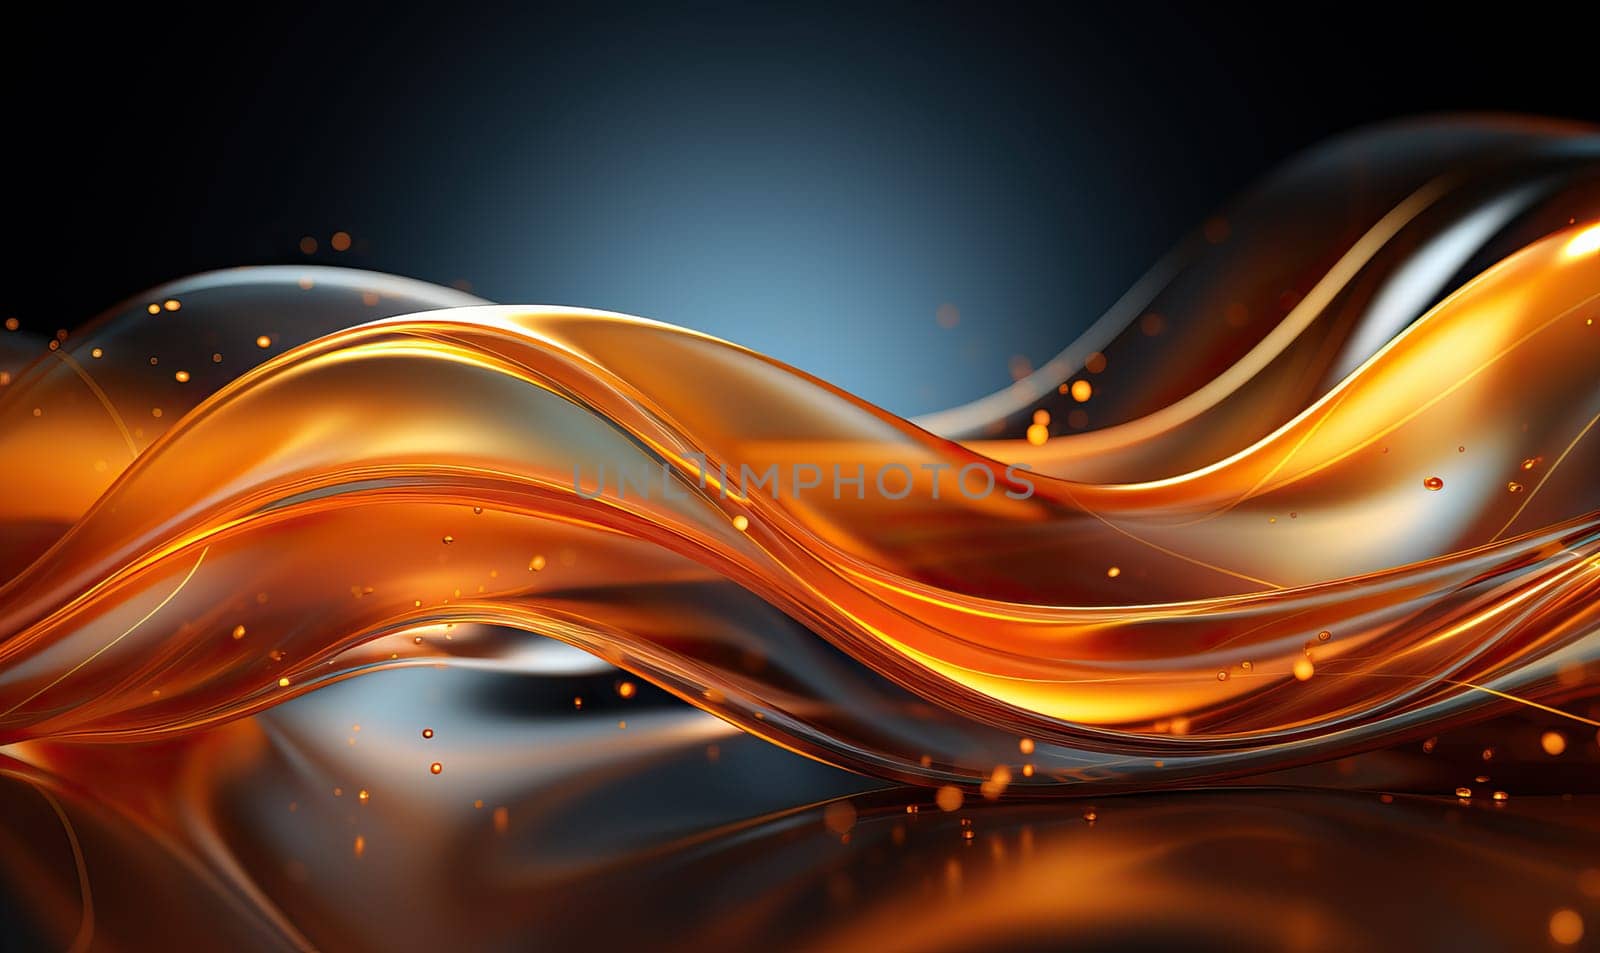 Creative of shiny elegant gold color and luxury wave elements with shiny lines on abstract background.